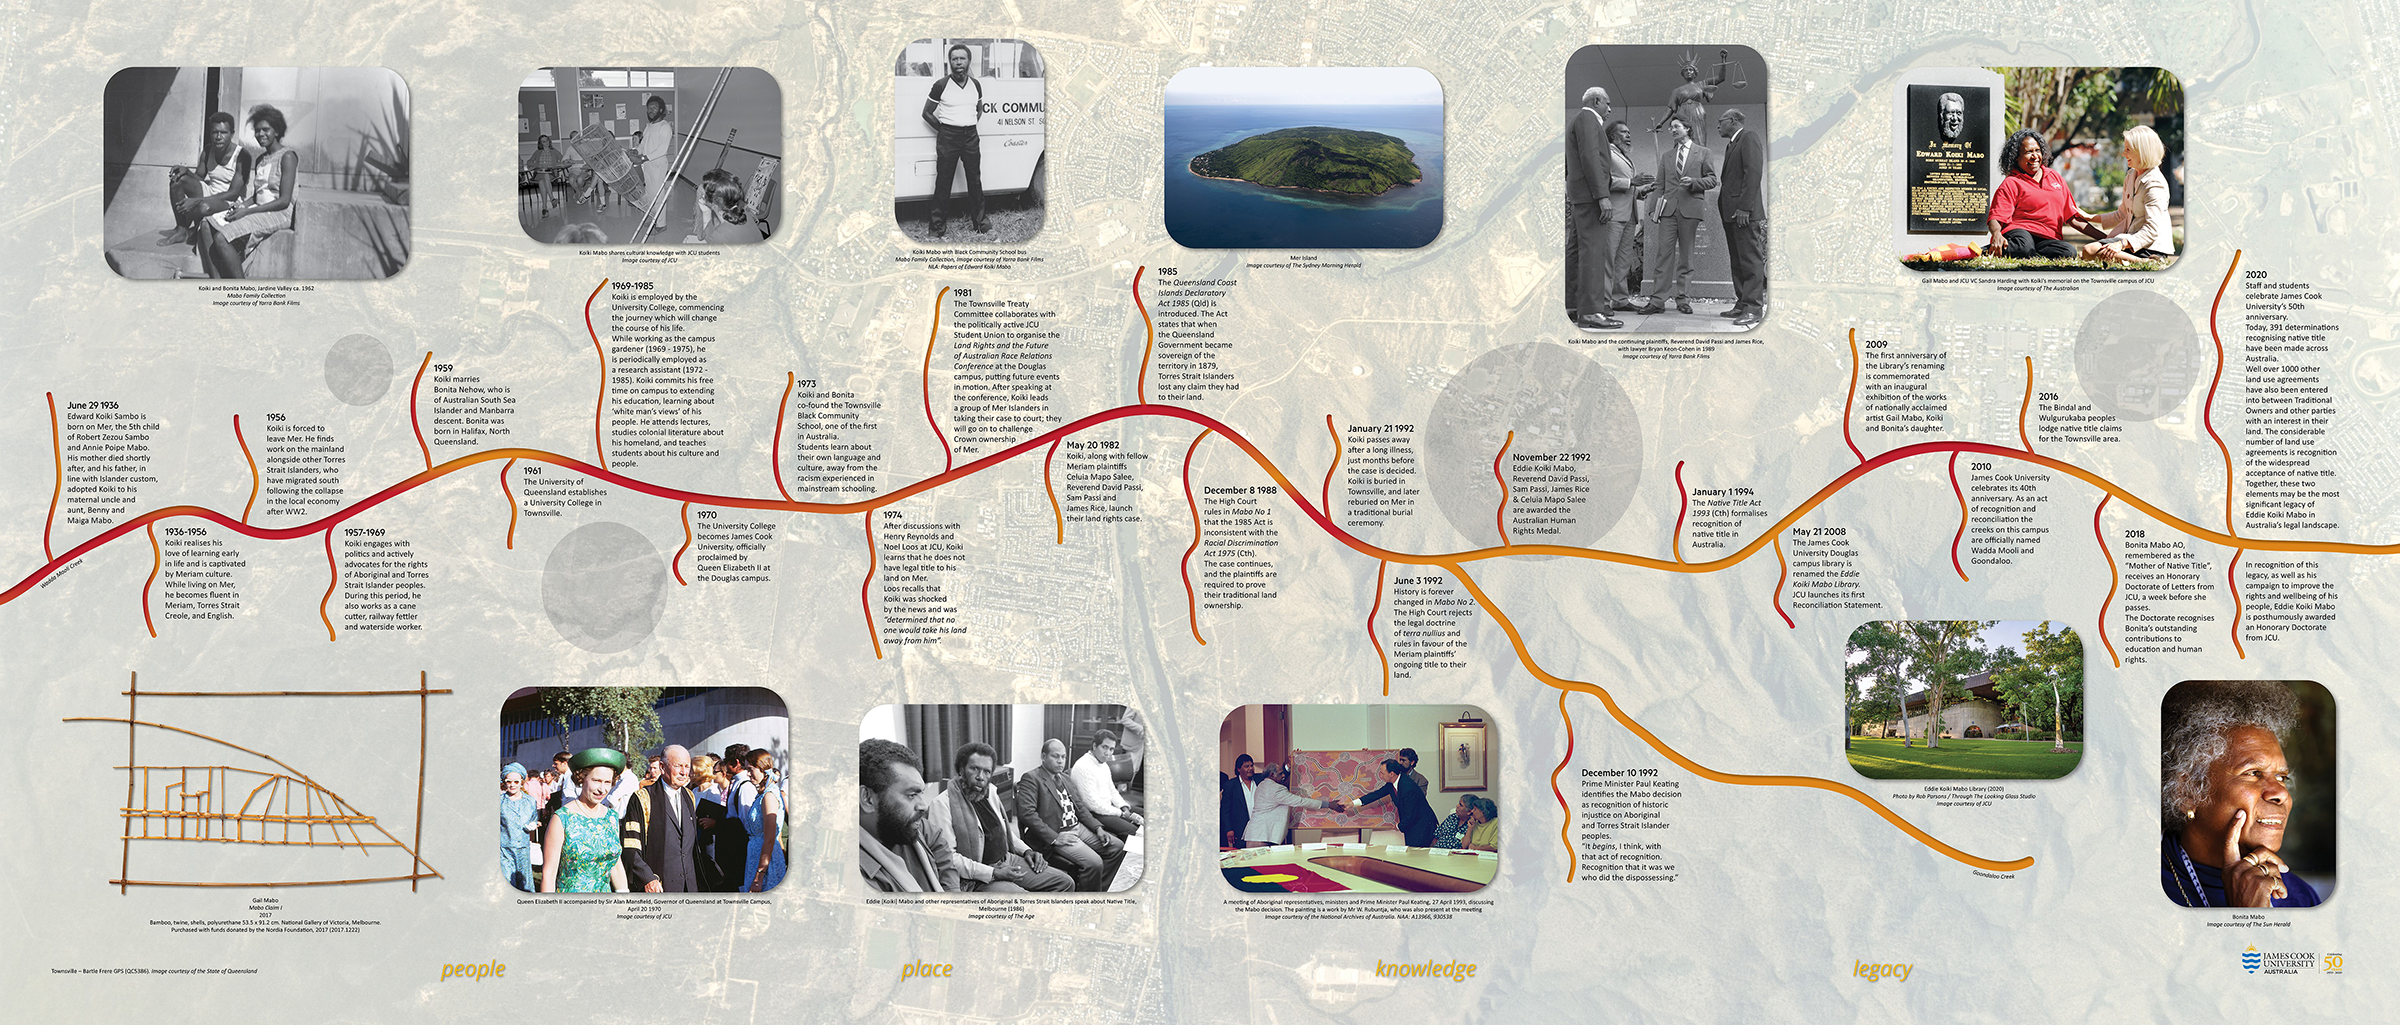 Panel 2 of the Mabo interpretive wall: Focuses on Eddie Koiki Mabo timeline with related events and imagery.